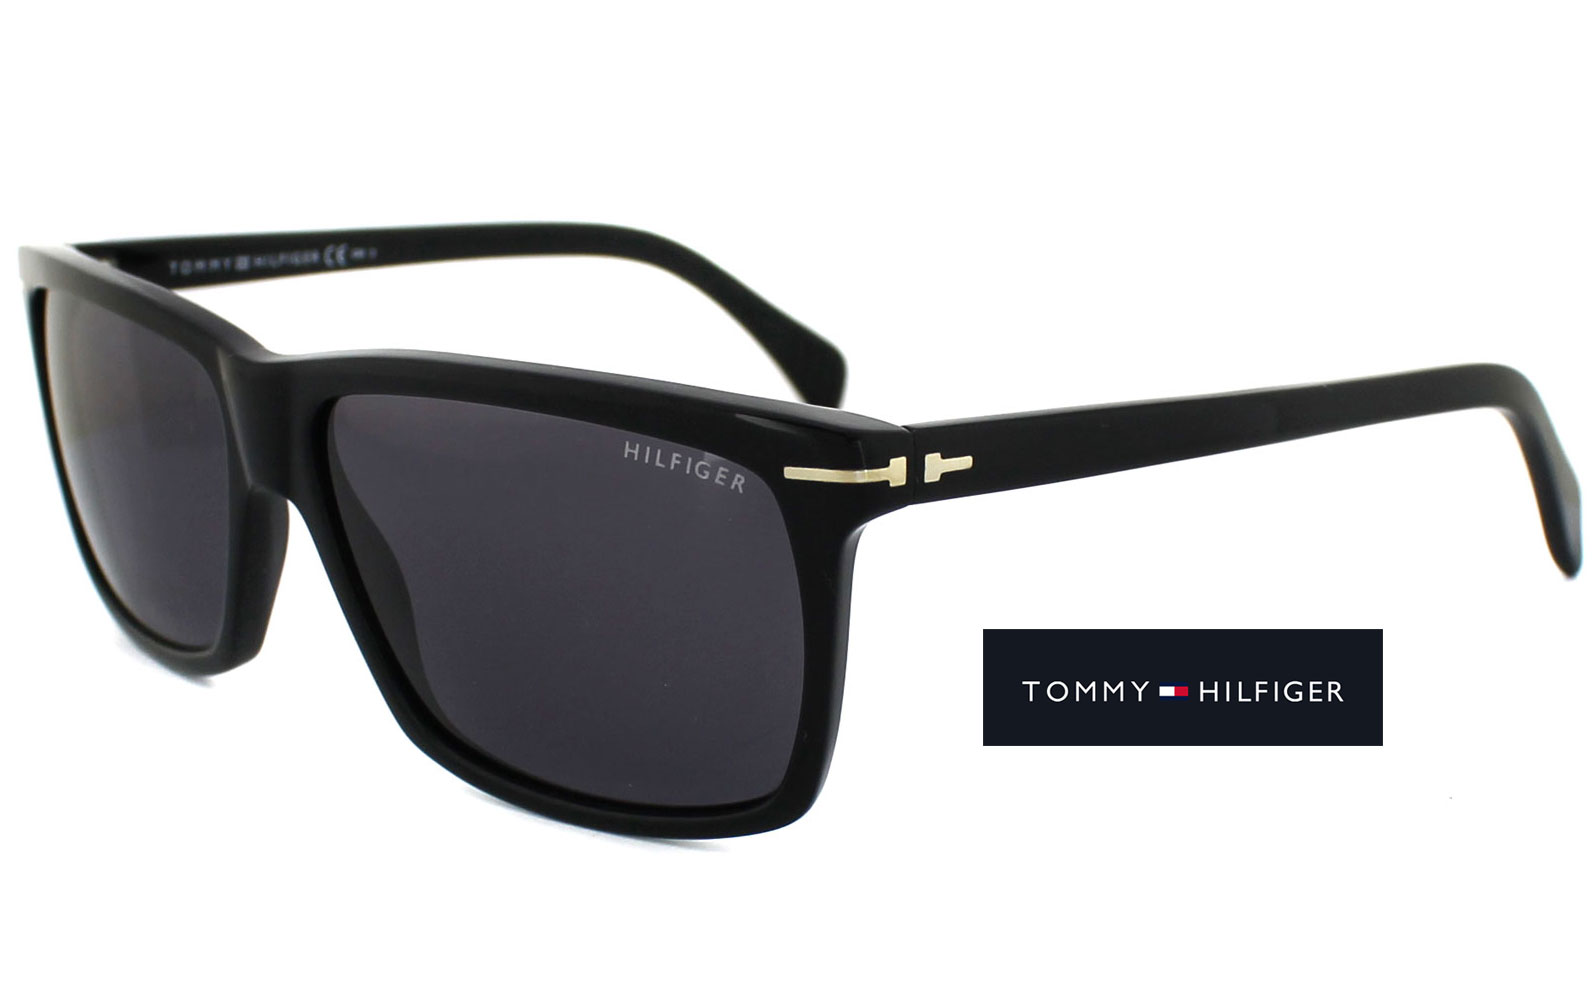 Tommy Hilfiger coming soon!